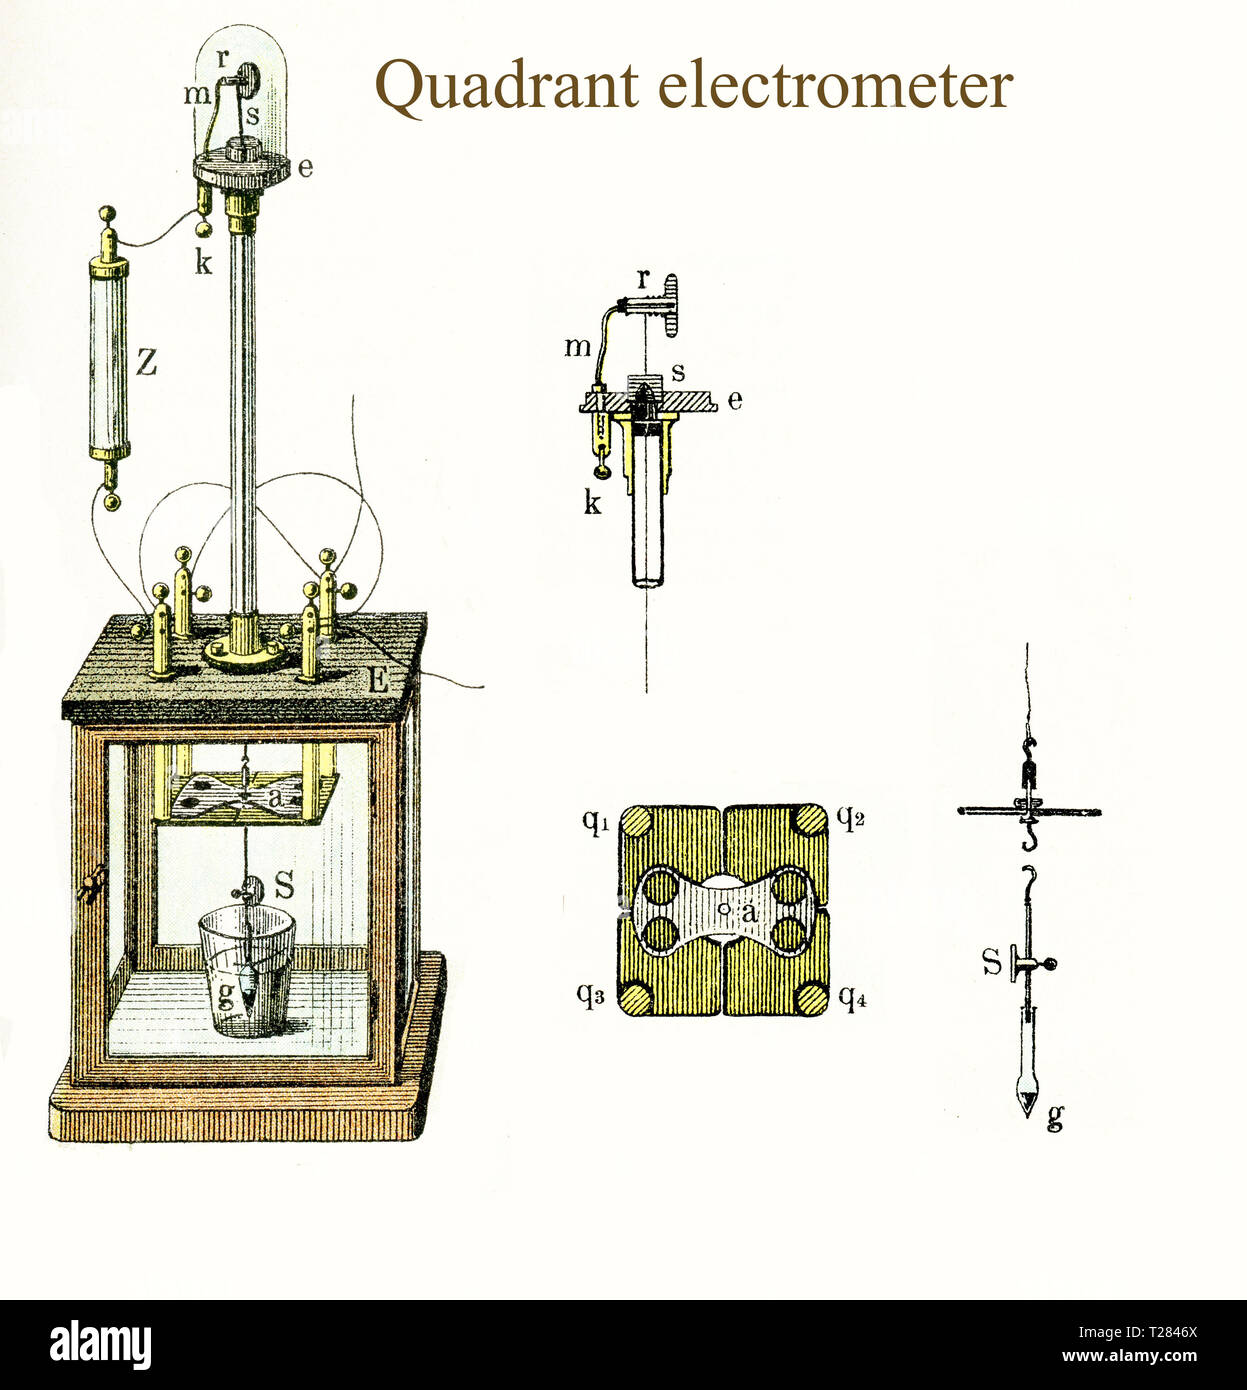 An electrometer is an instrument for measuring electric charge or electrical potential difference.In the quadrant electrometer torsion is used to give a measurement more sensitive than repulsion of gold leaves, improving the Coulomb torsion balance. Stock Photo